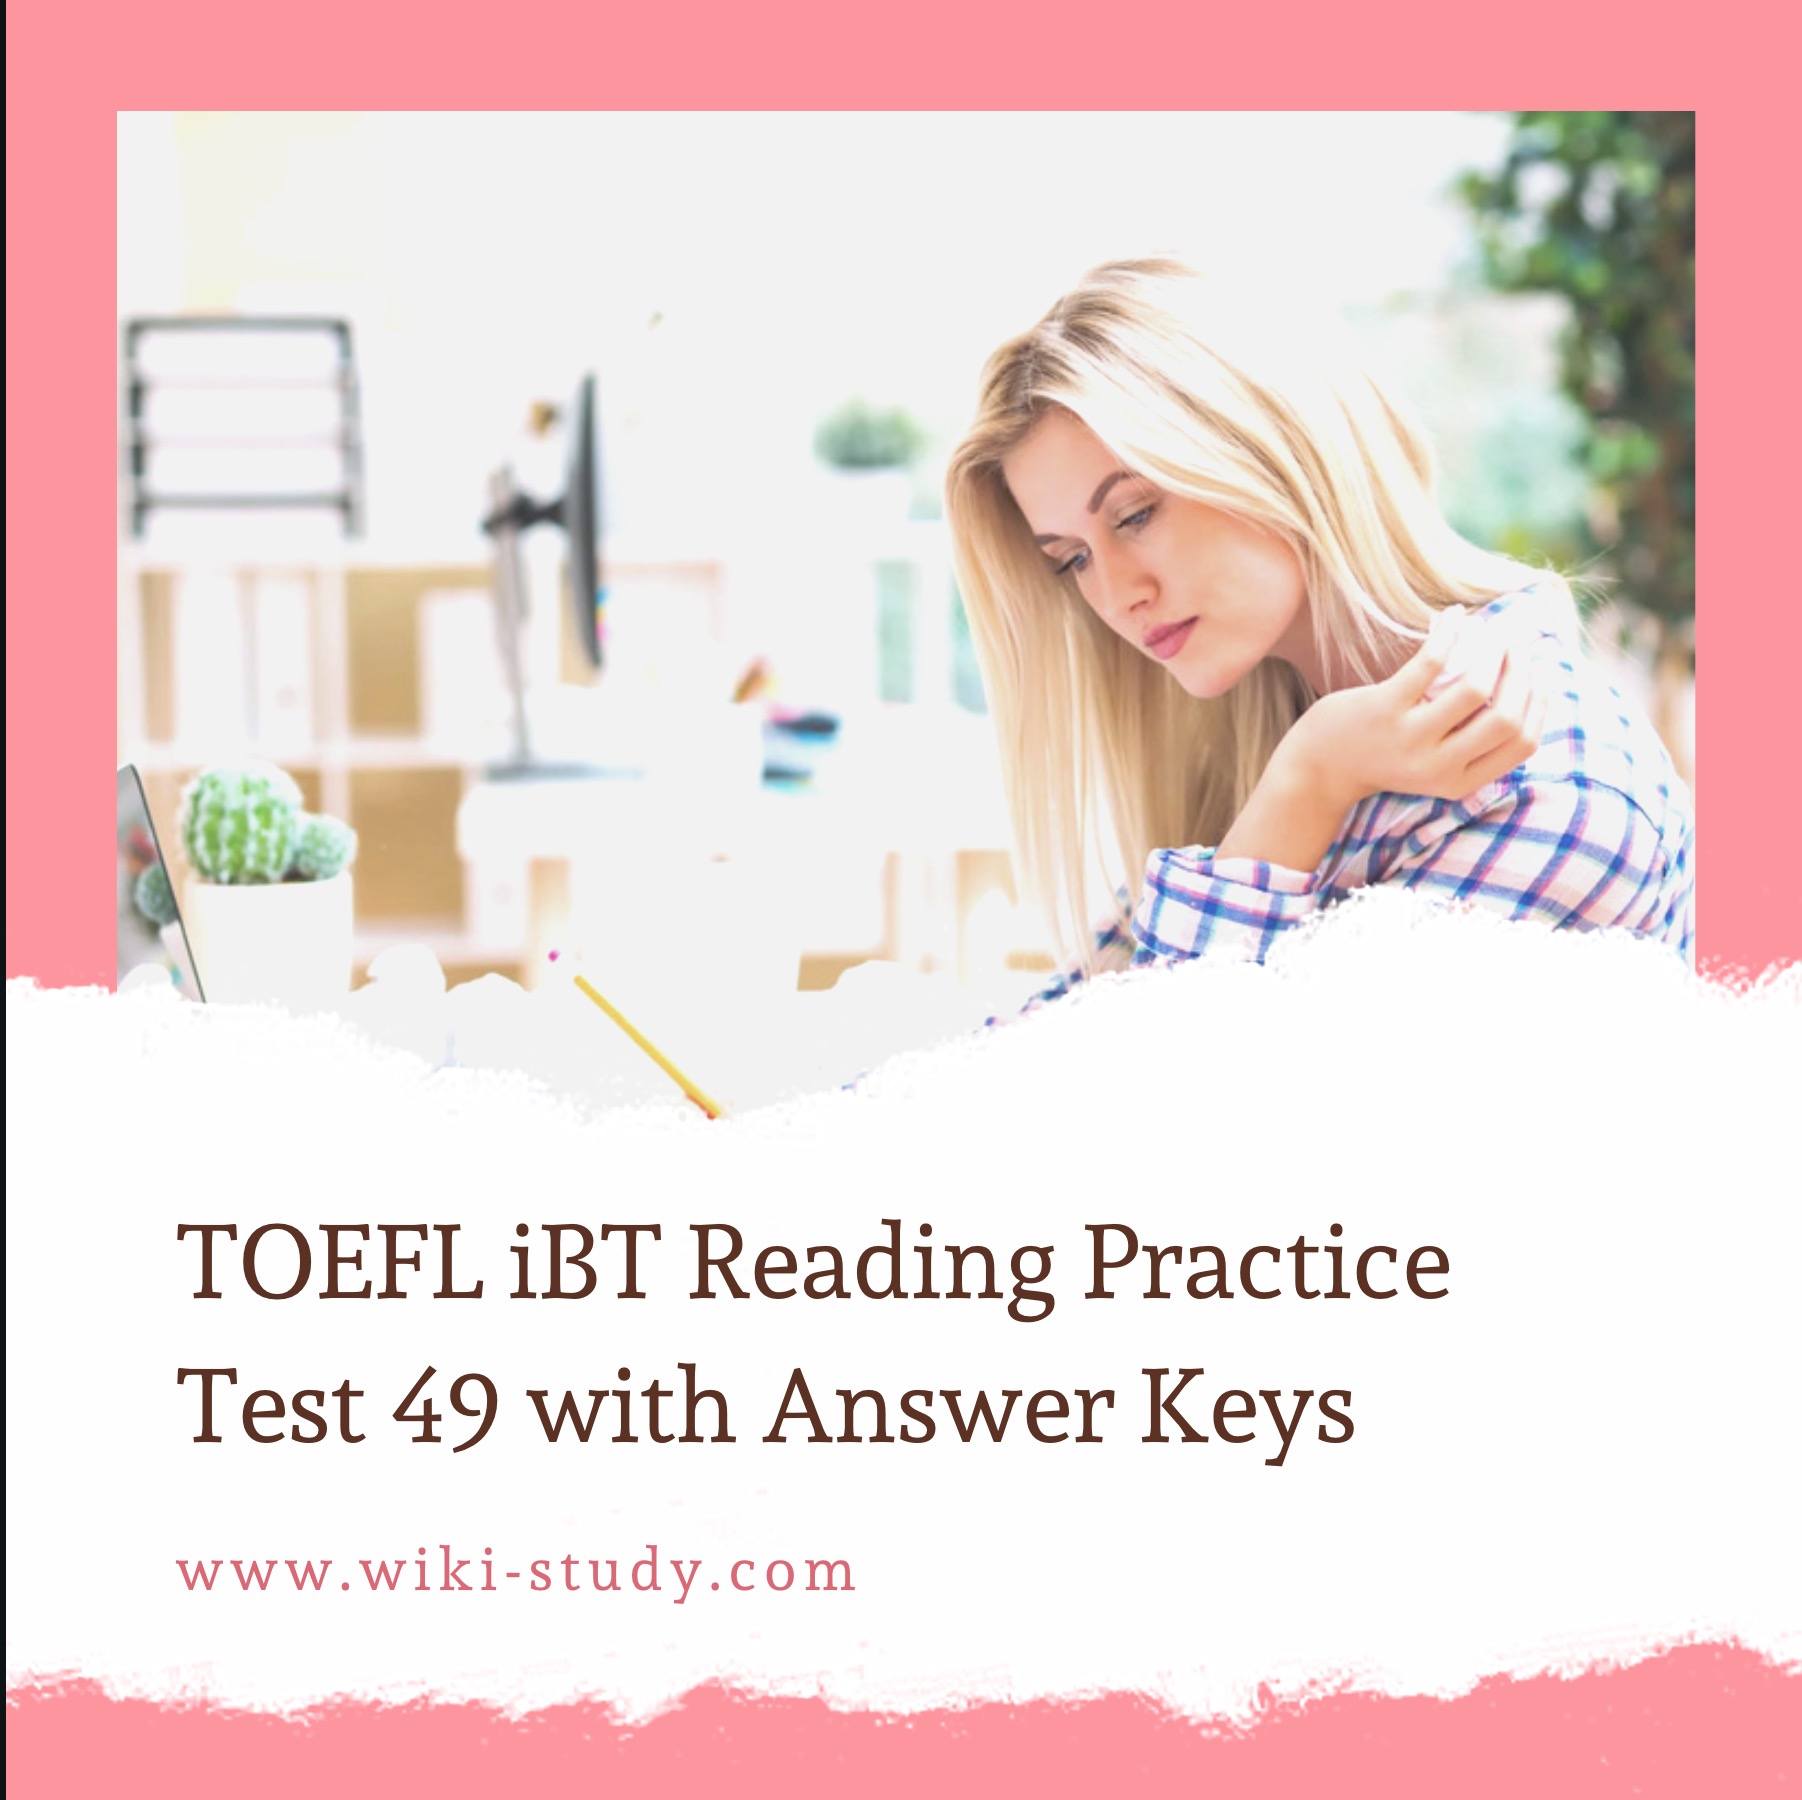 TOEFL iBT Reading Practice Test 49 with Answer Keys